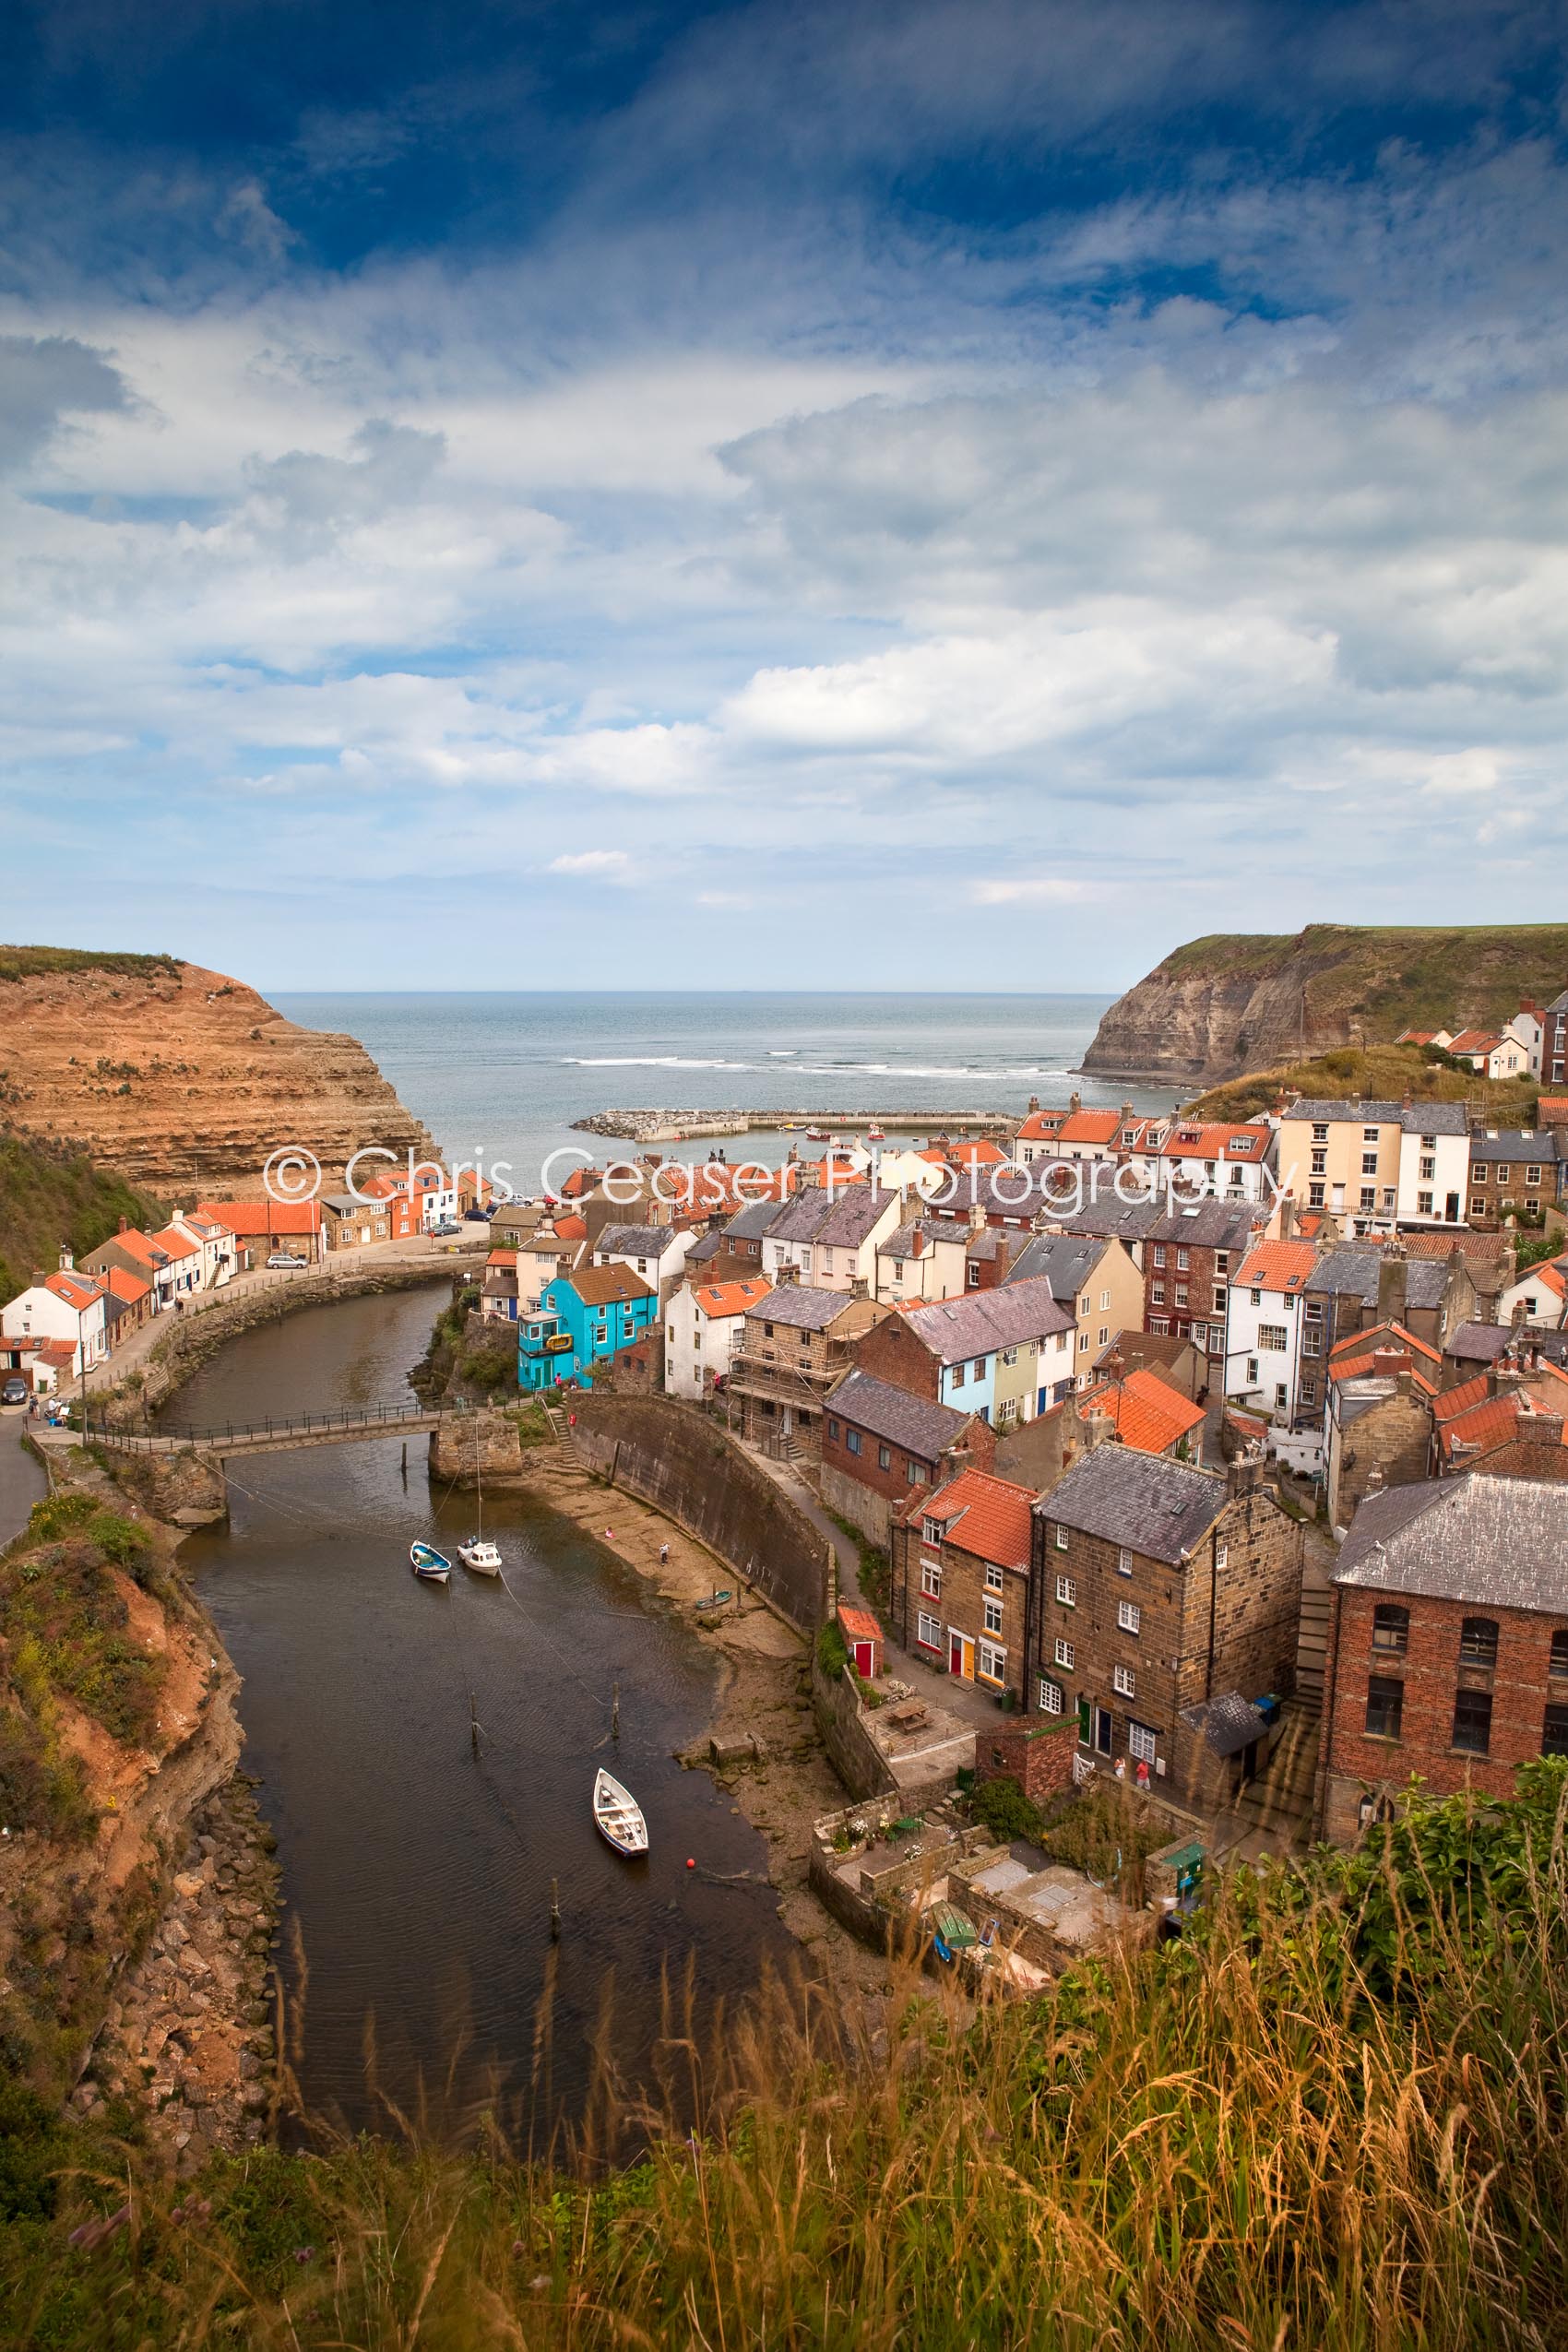 Along The River, Staithes